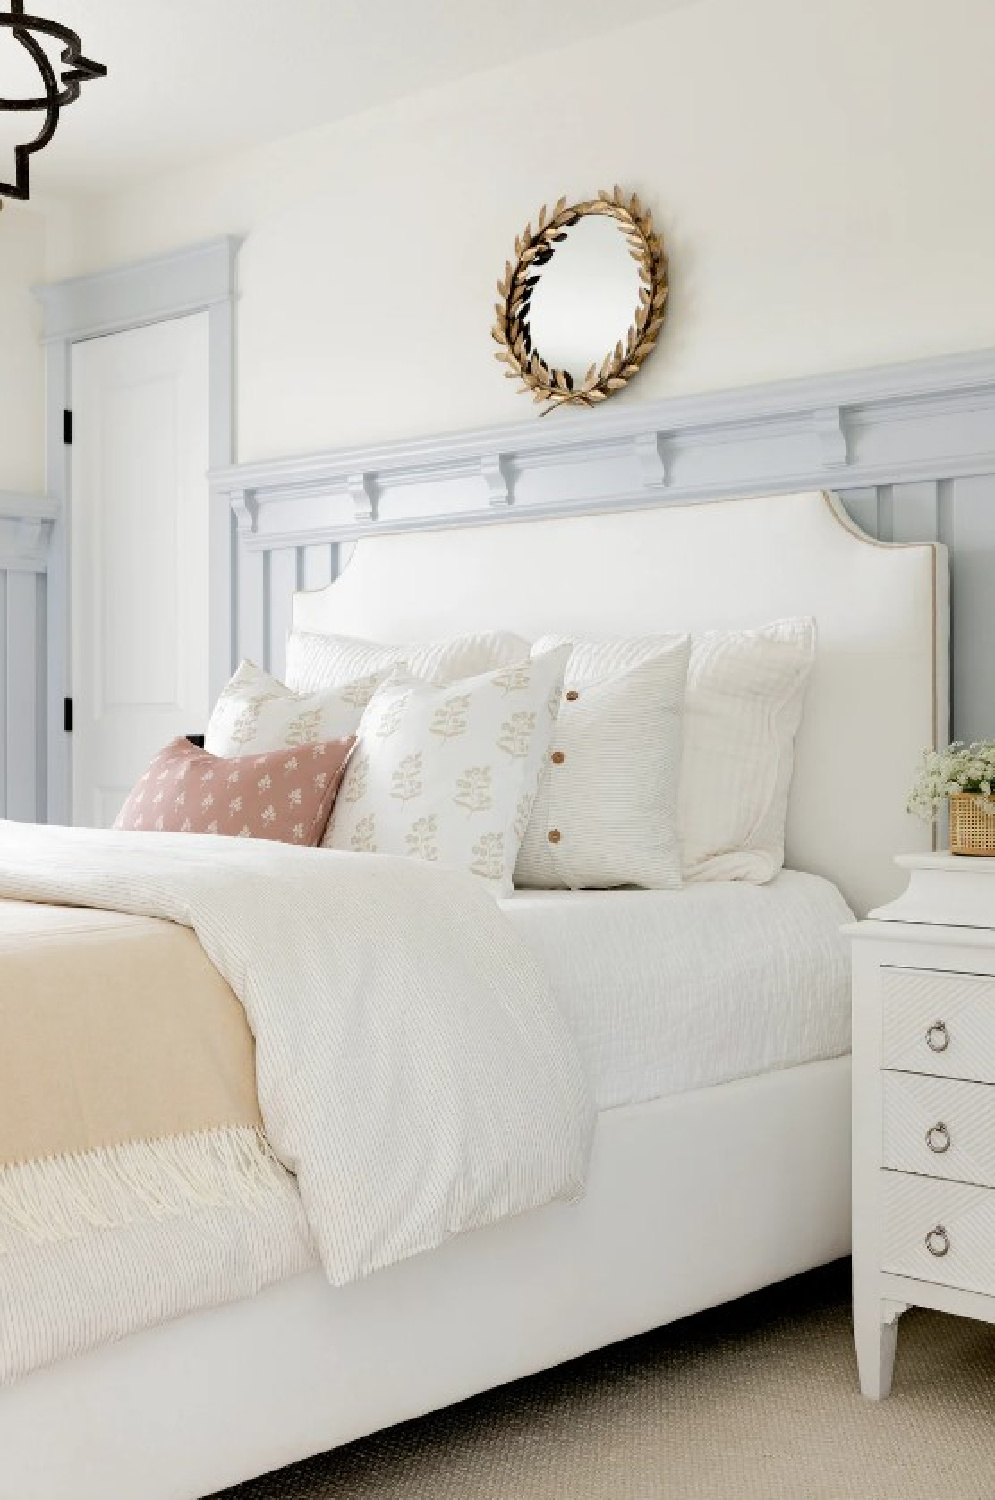 Bria Hammel designed bedroom with cool grey-blue wainscot, creamy walls, antique laurel round wreath mirror above bed, and bedding from BrookeandLou. #traditionalbedrooms #romanticbedrooms 